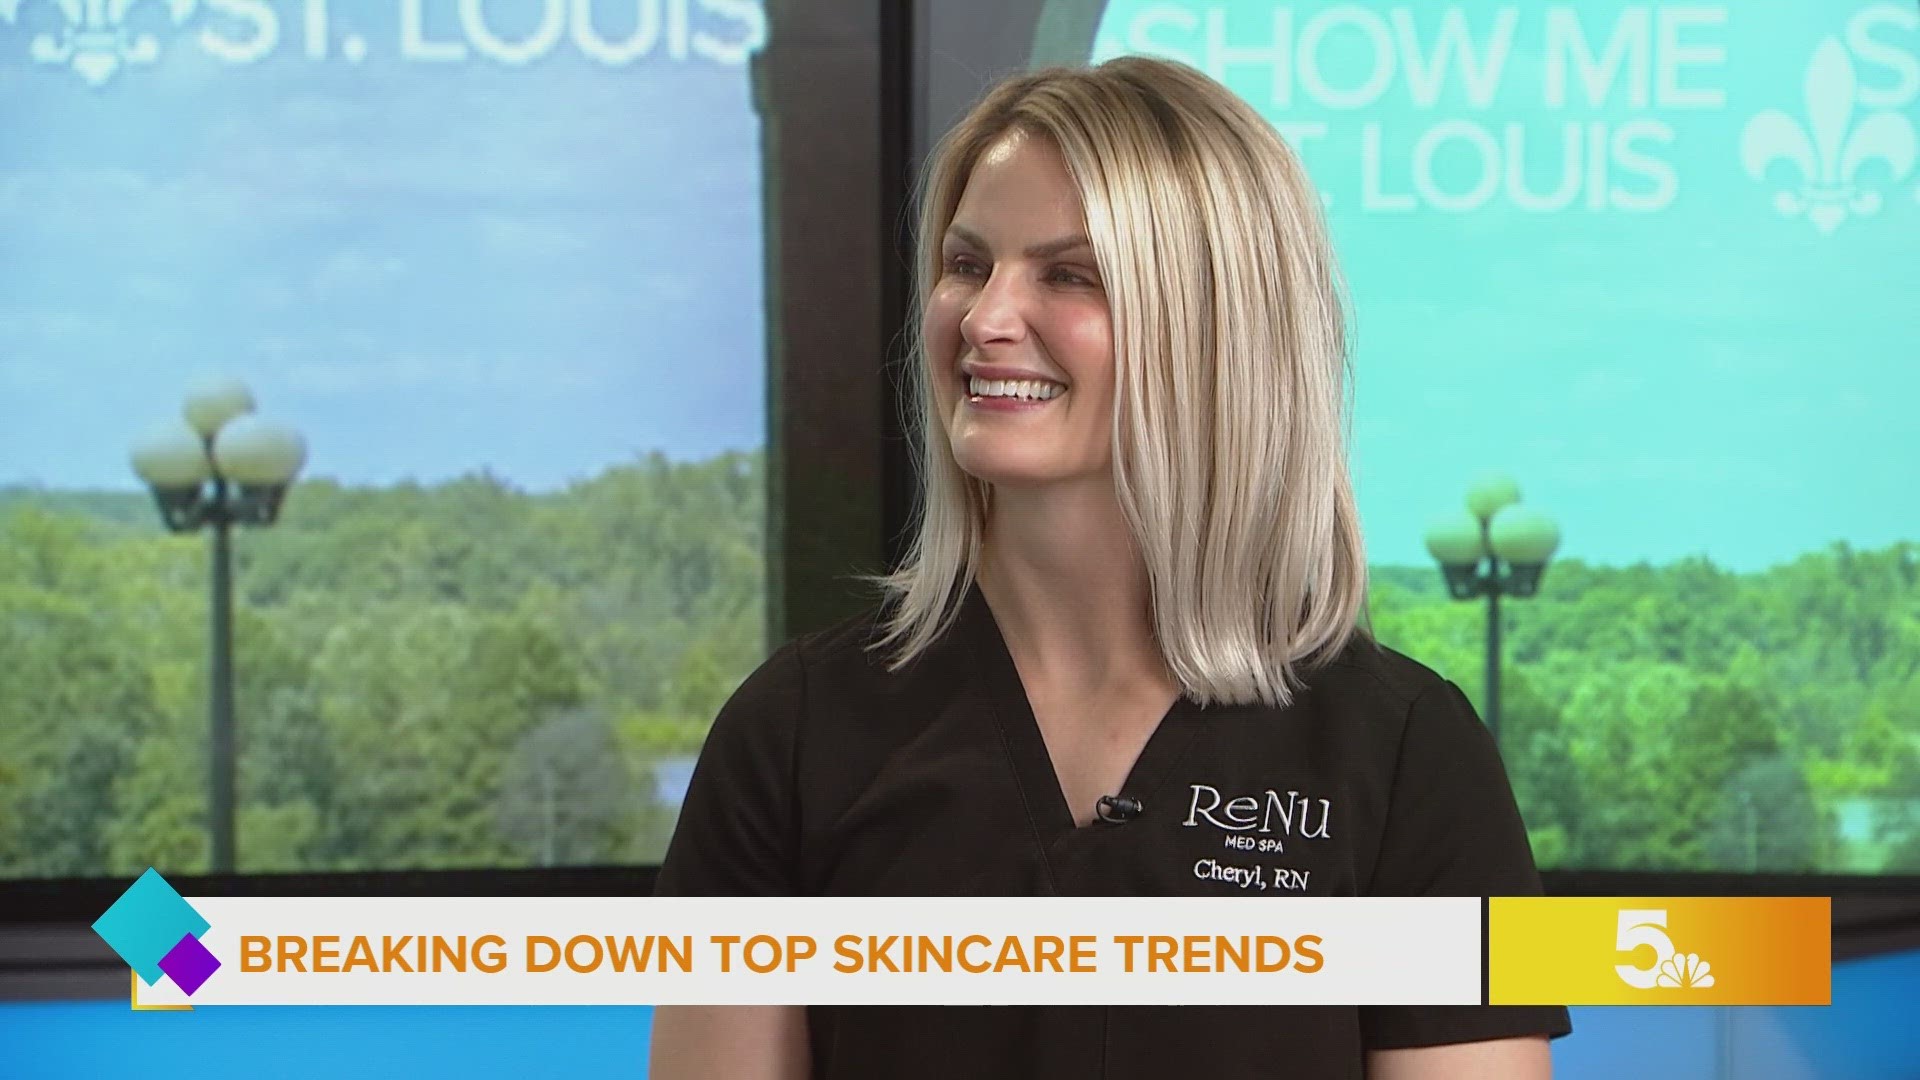 Mary chats with Cheryl Hazen, owner of ReNu Med Spa